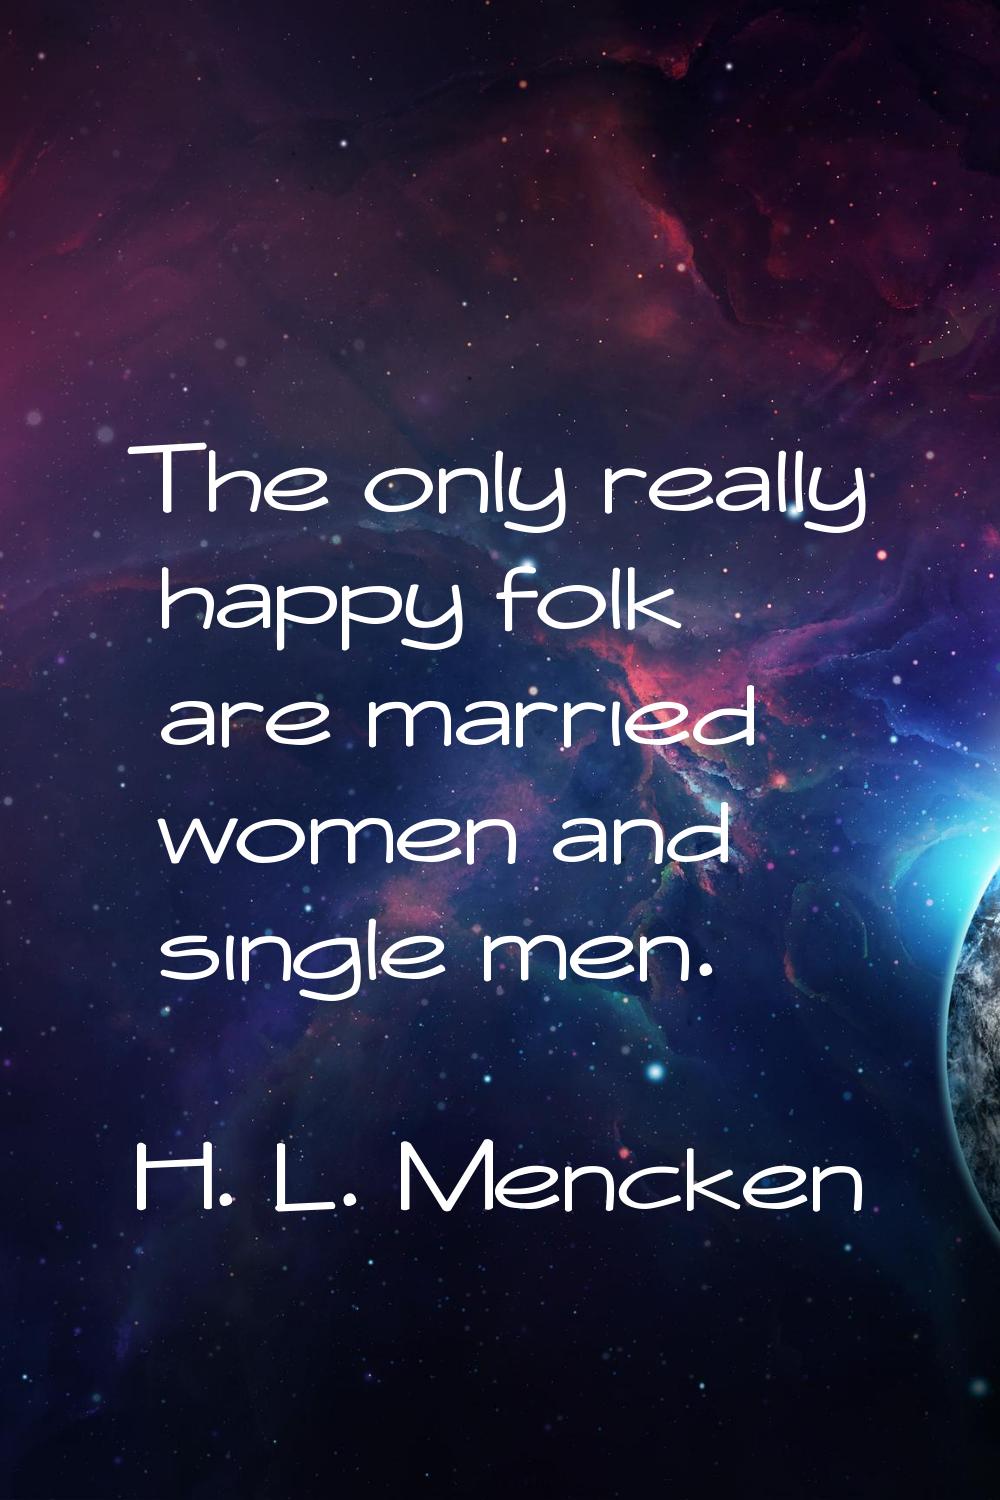 The only really happy folk are married women and single men.